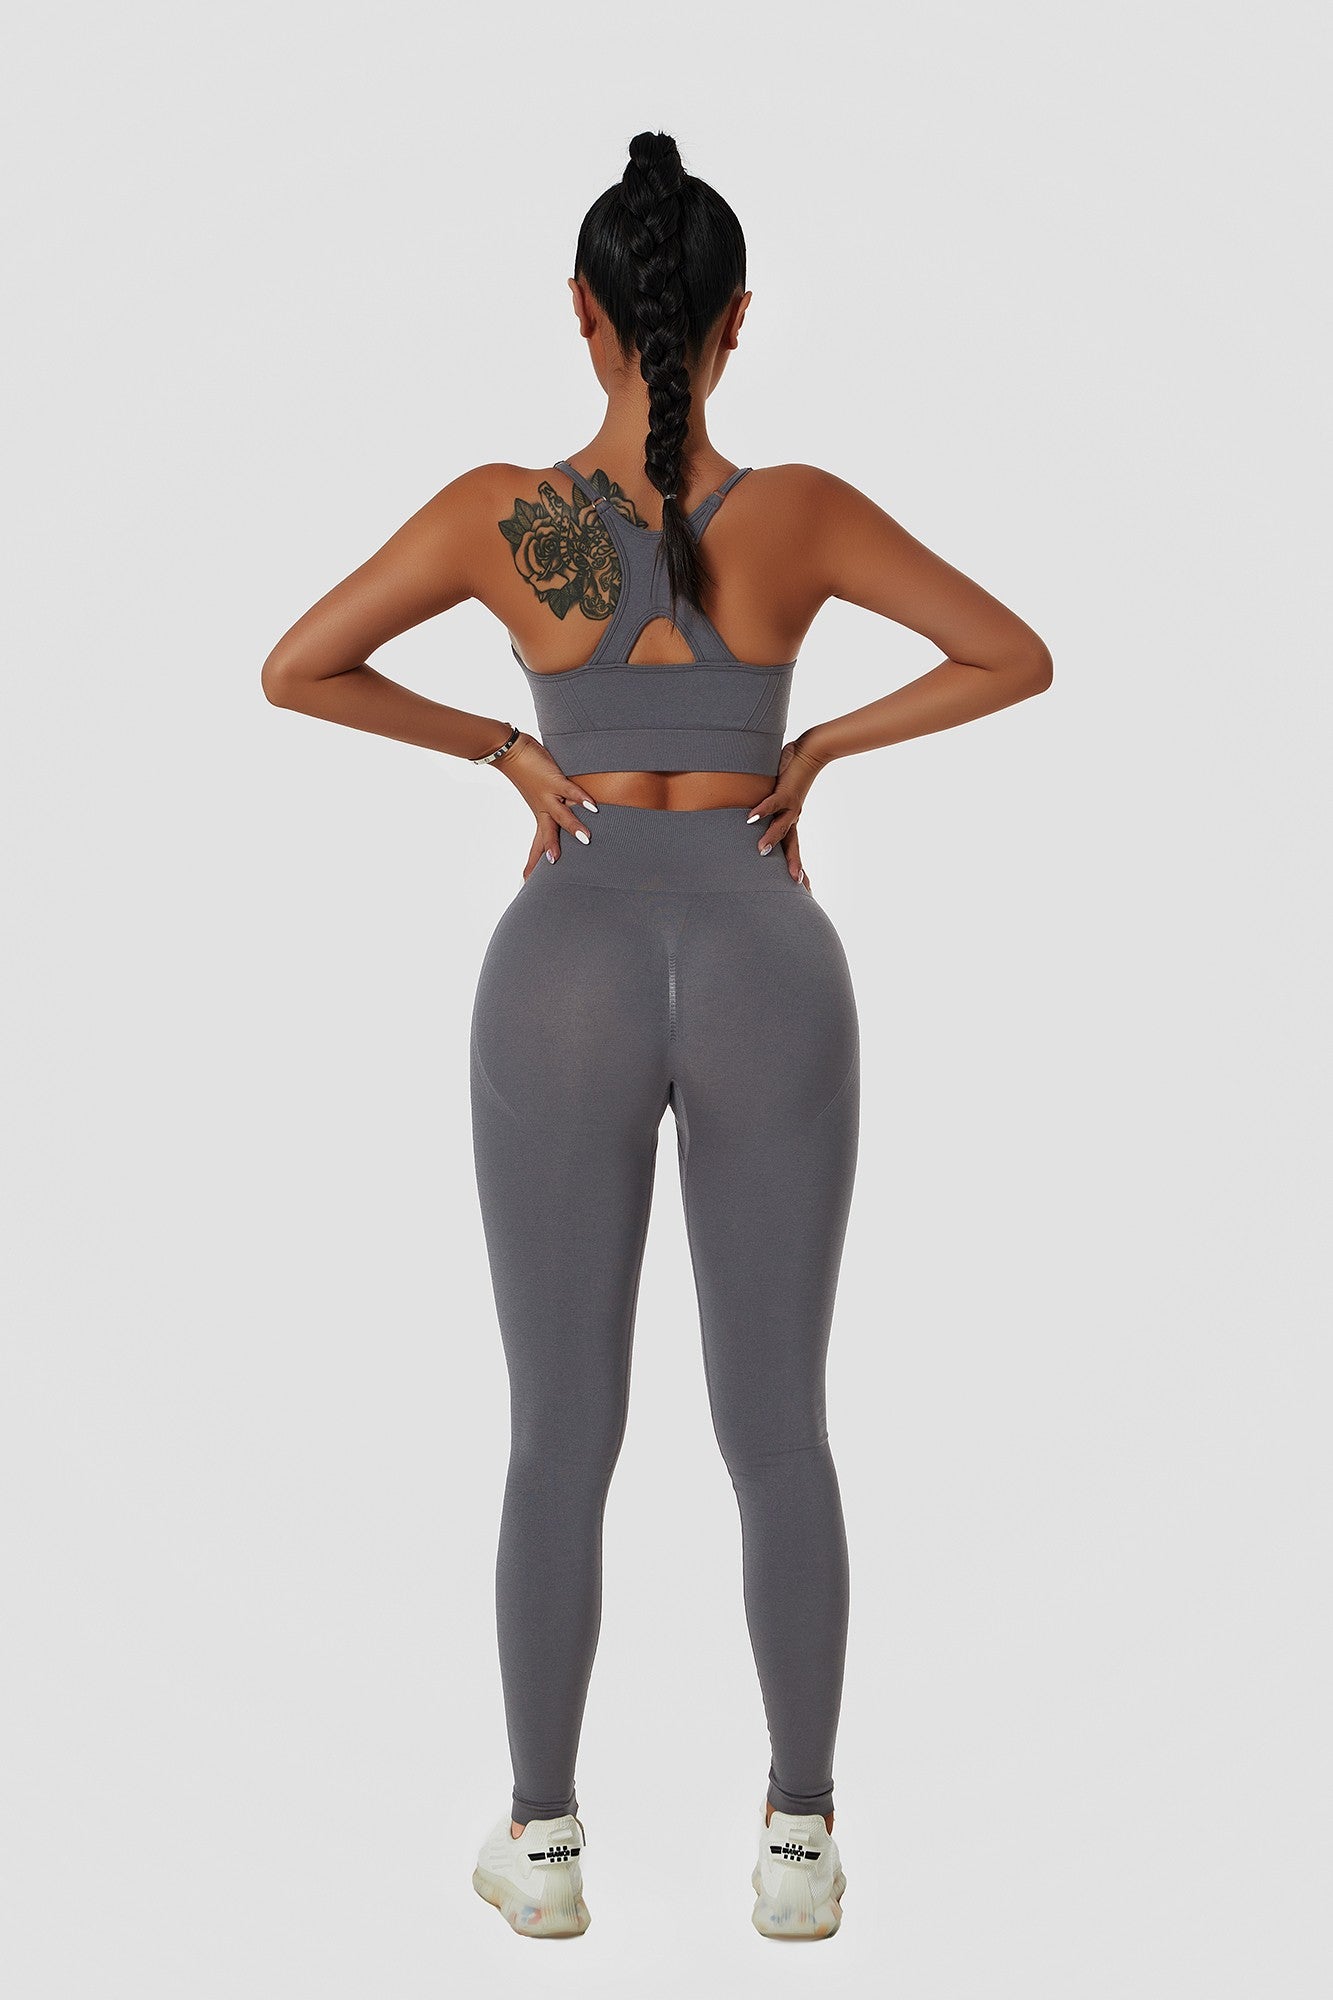 FITTOO Leggings Scrunch Mujer Mallas Sin Costura Booty Push Up